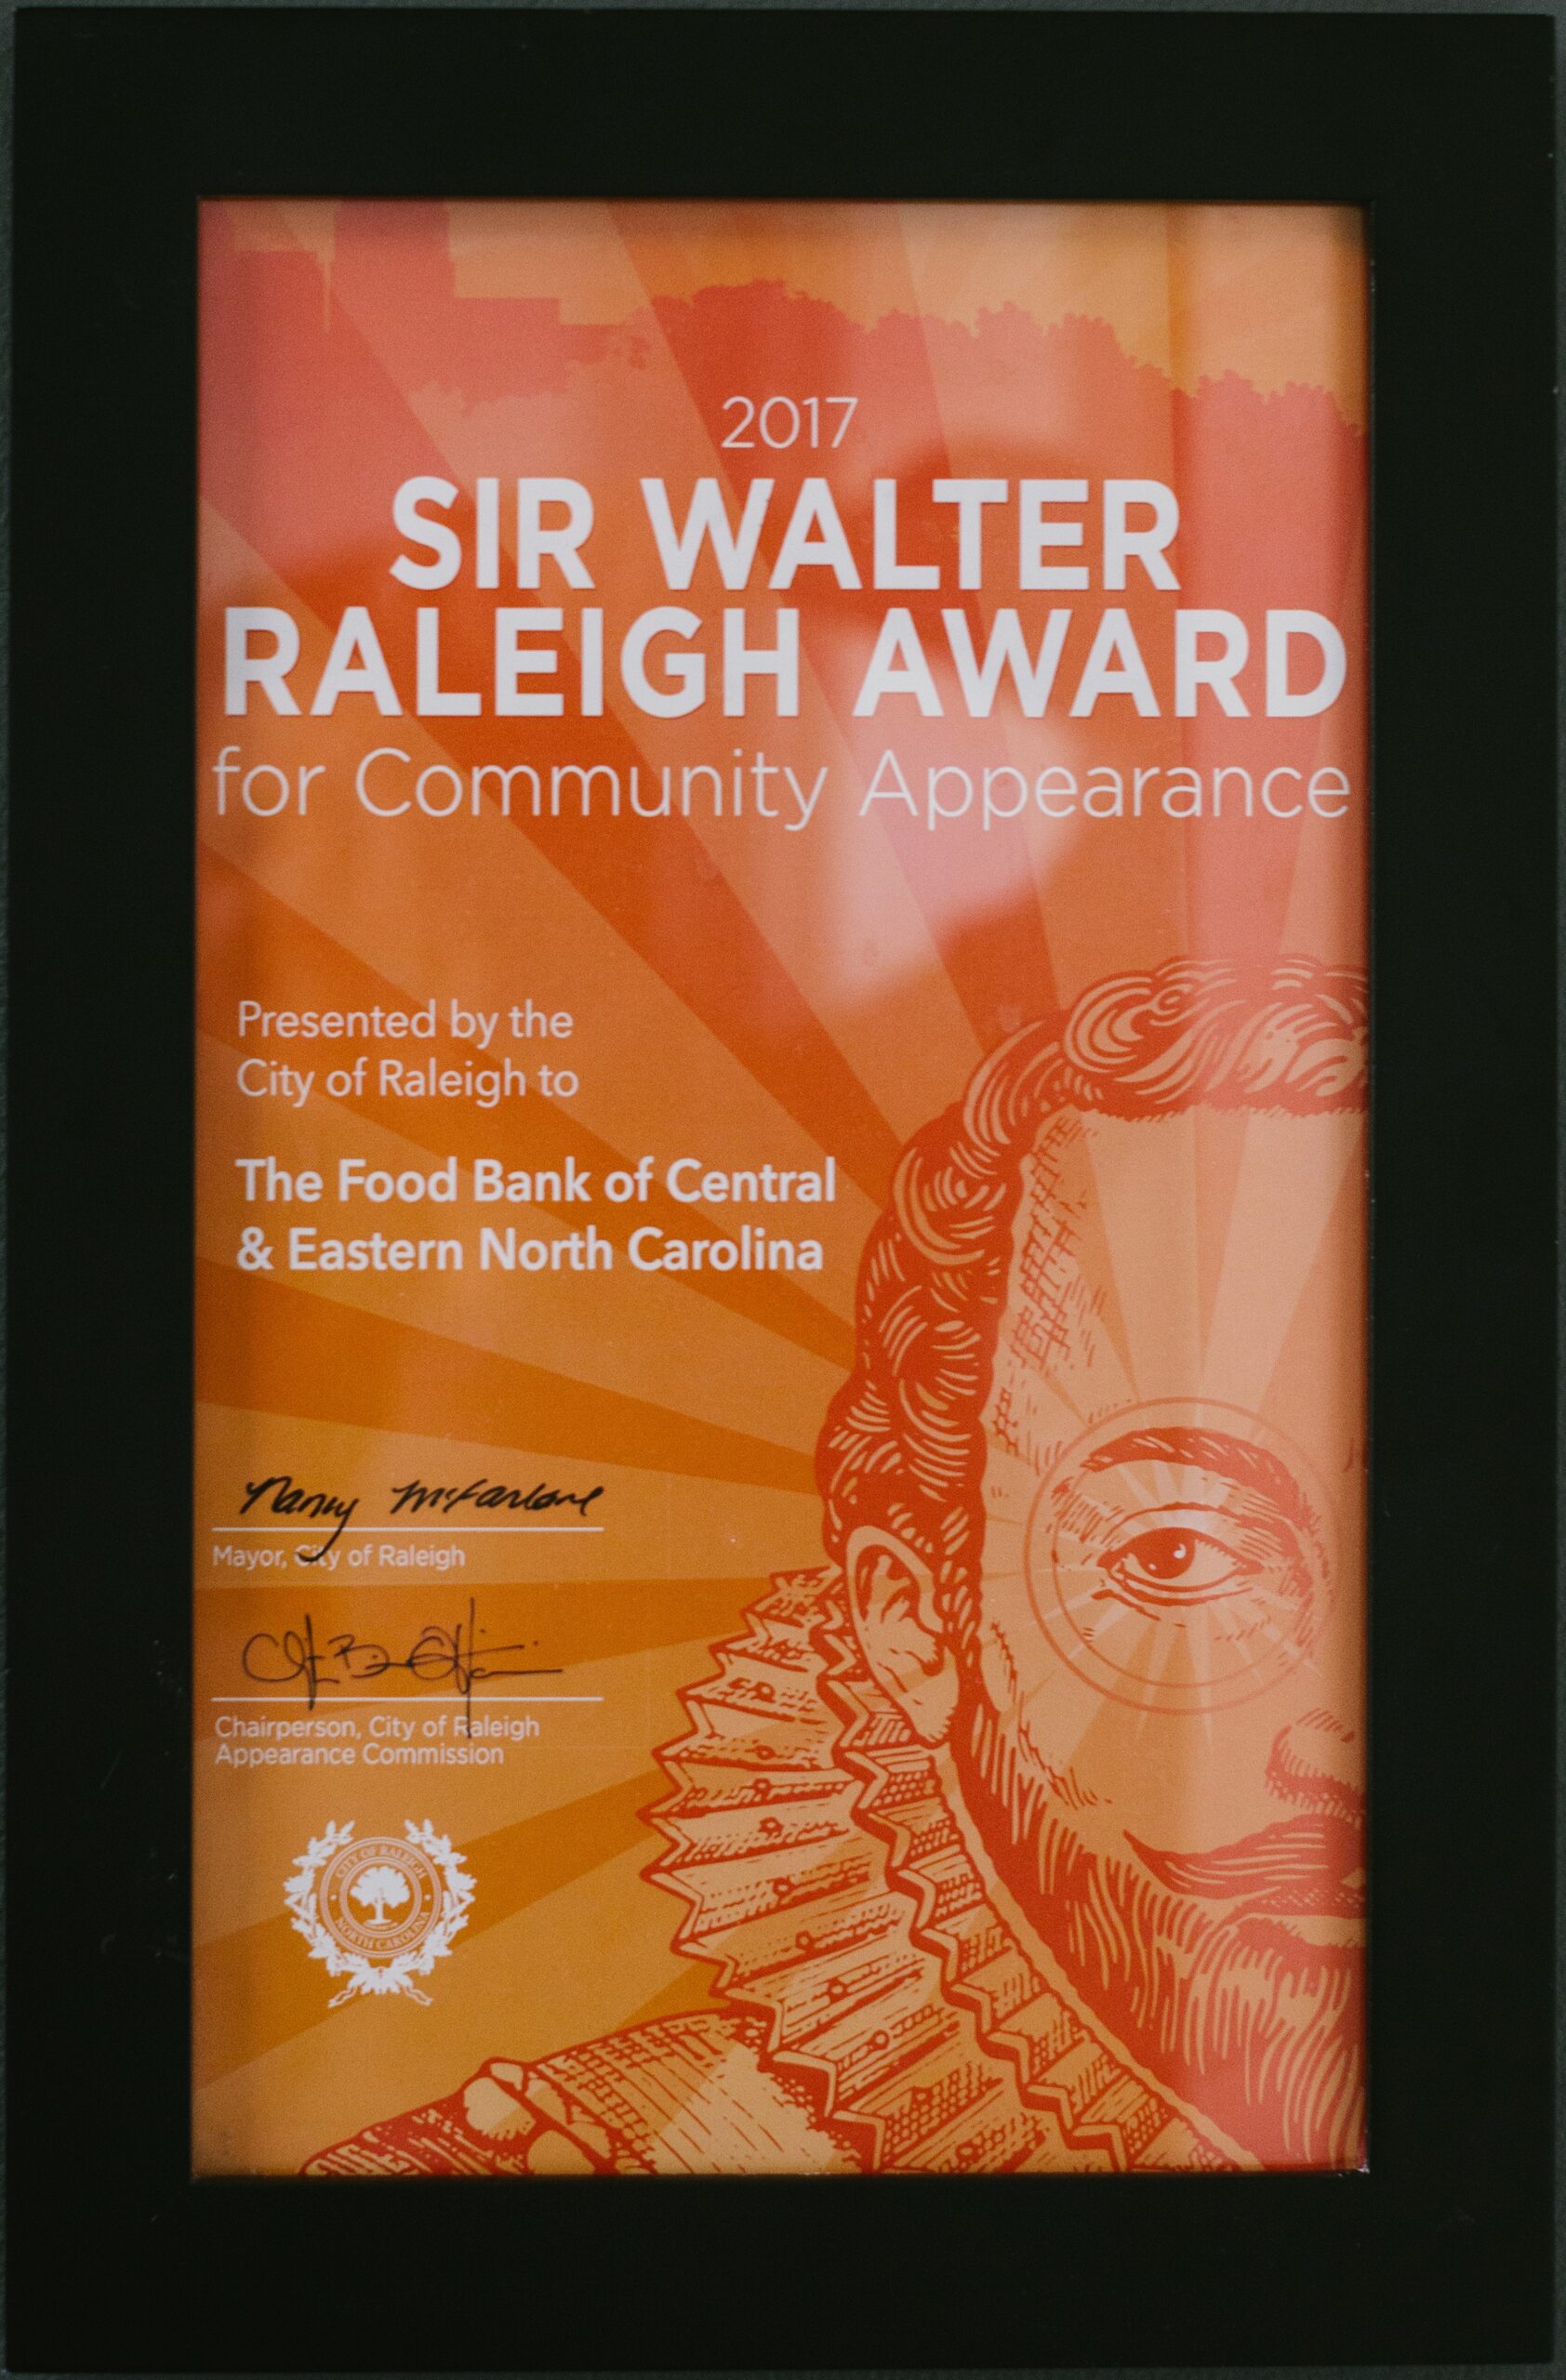 Sir Walter Raleigh Award for Community Appearance – The Food Bank of Central and Eastern North Carolina